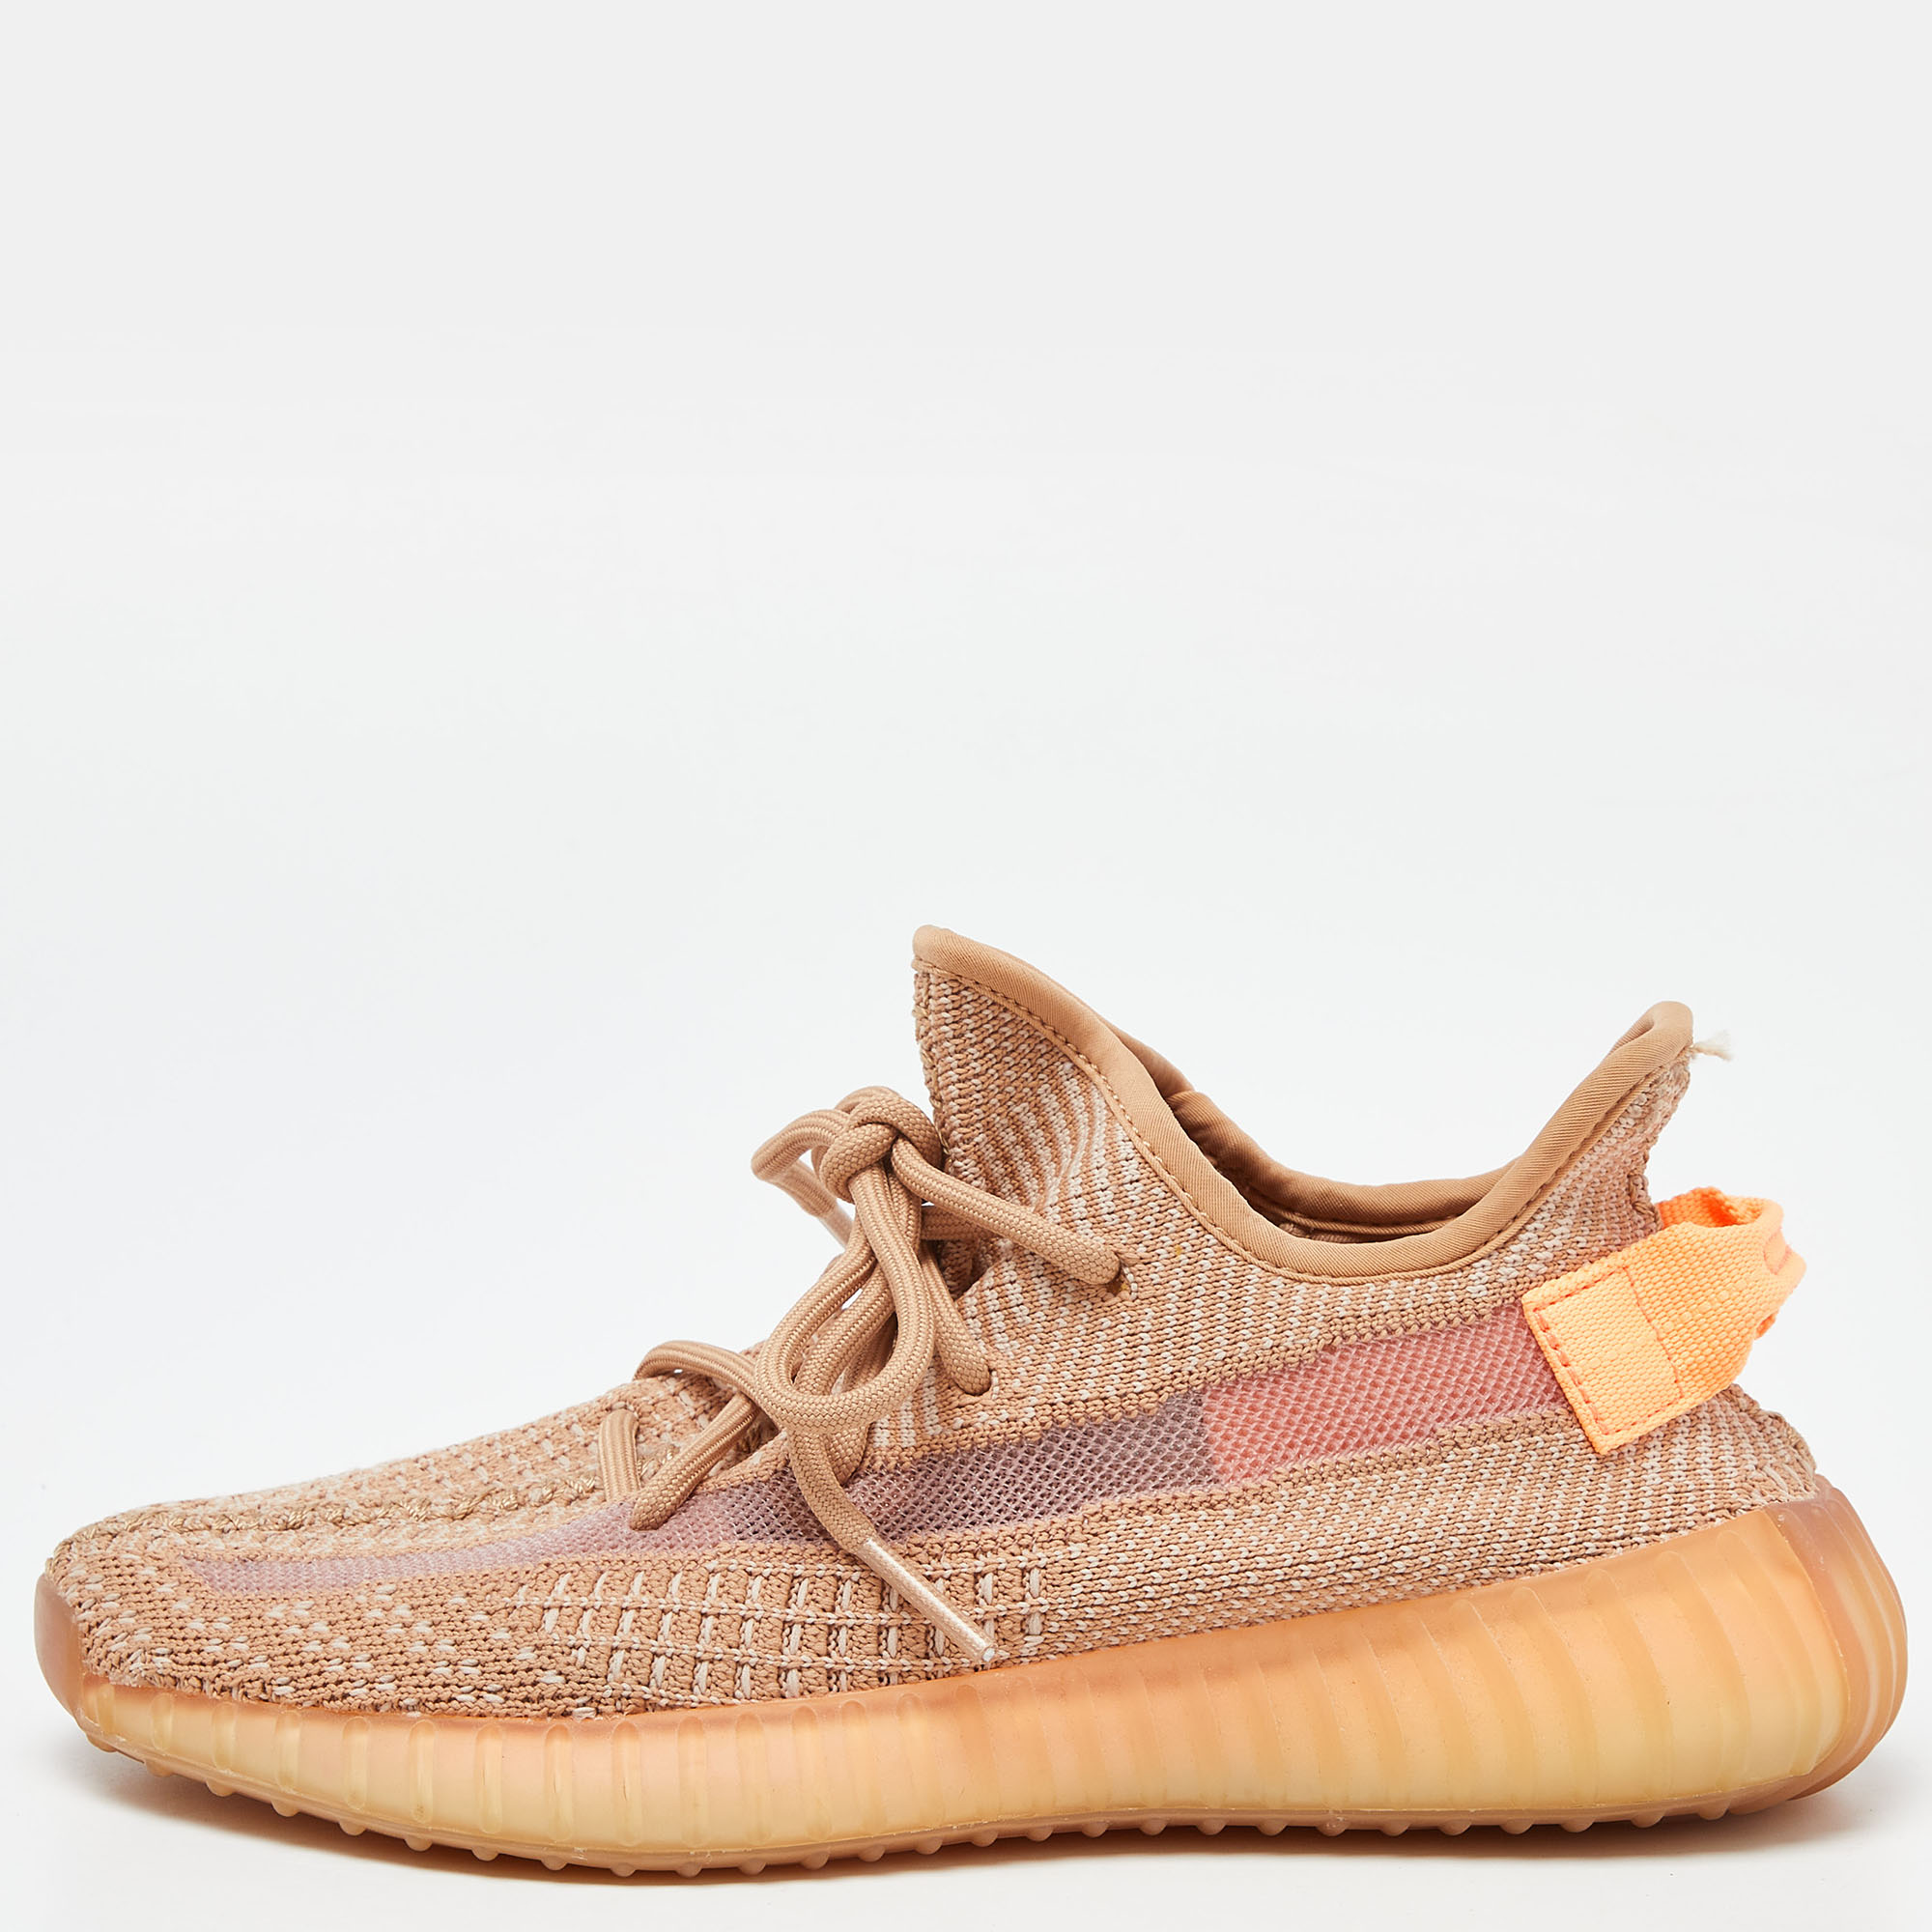 Yeezy x adidas orange knit fabric boost 350 v2 clay sneakers size 37 1/3